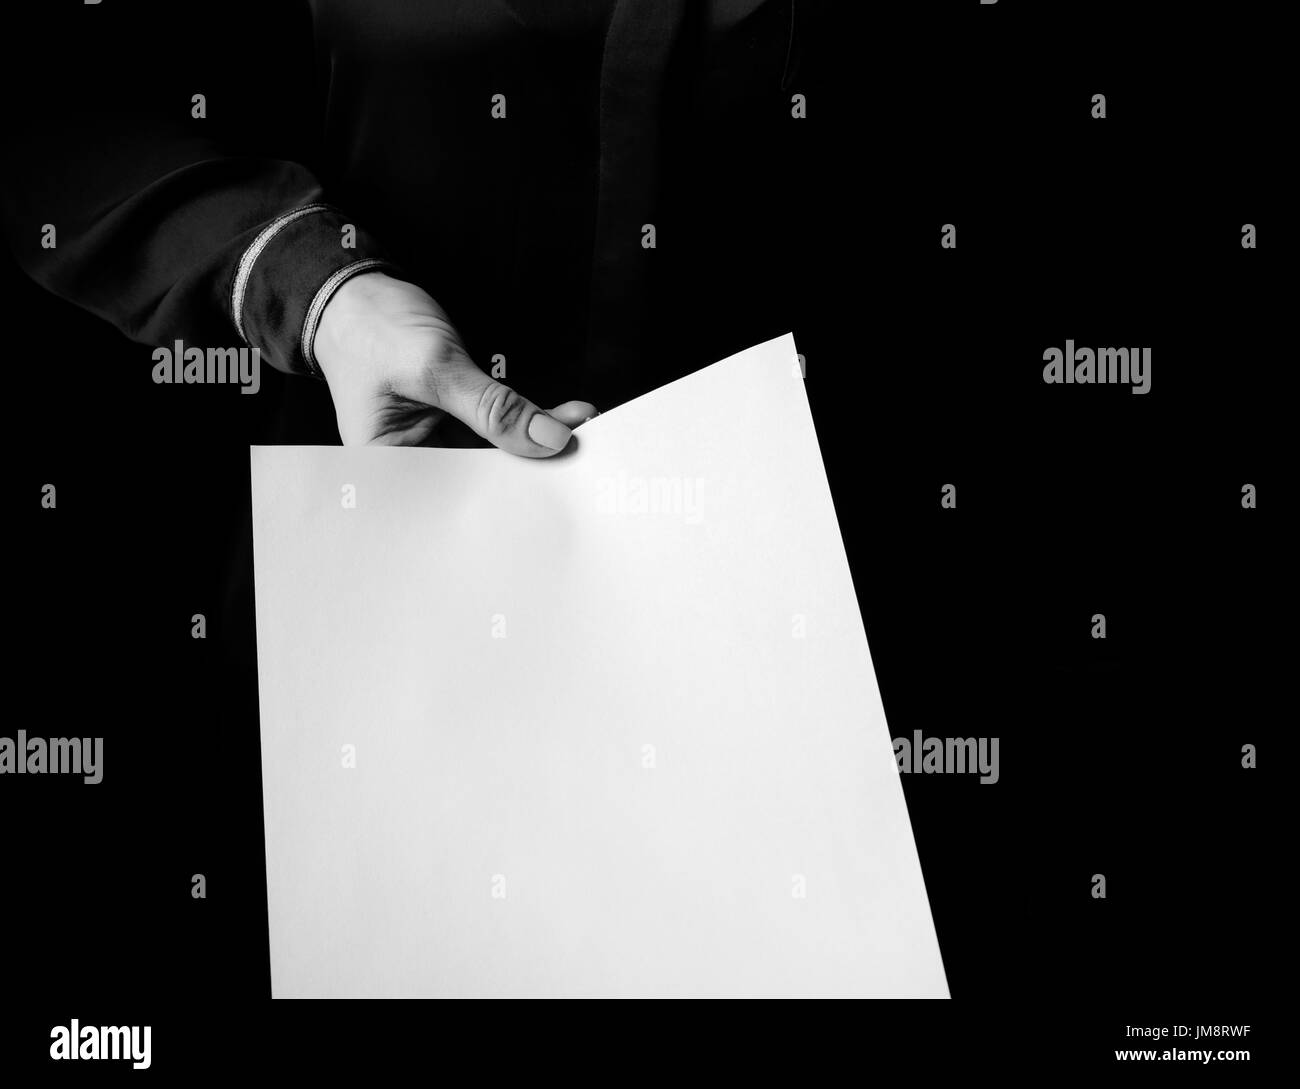 Black Mania. female hand isolated on black background giving paper sheet Stock Photo